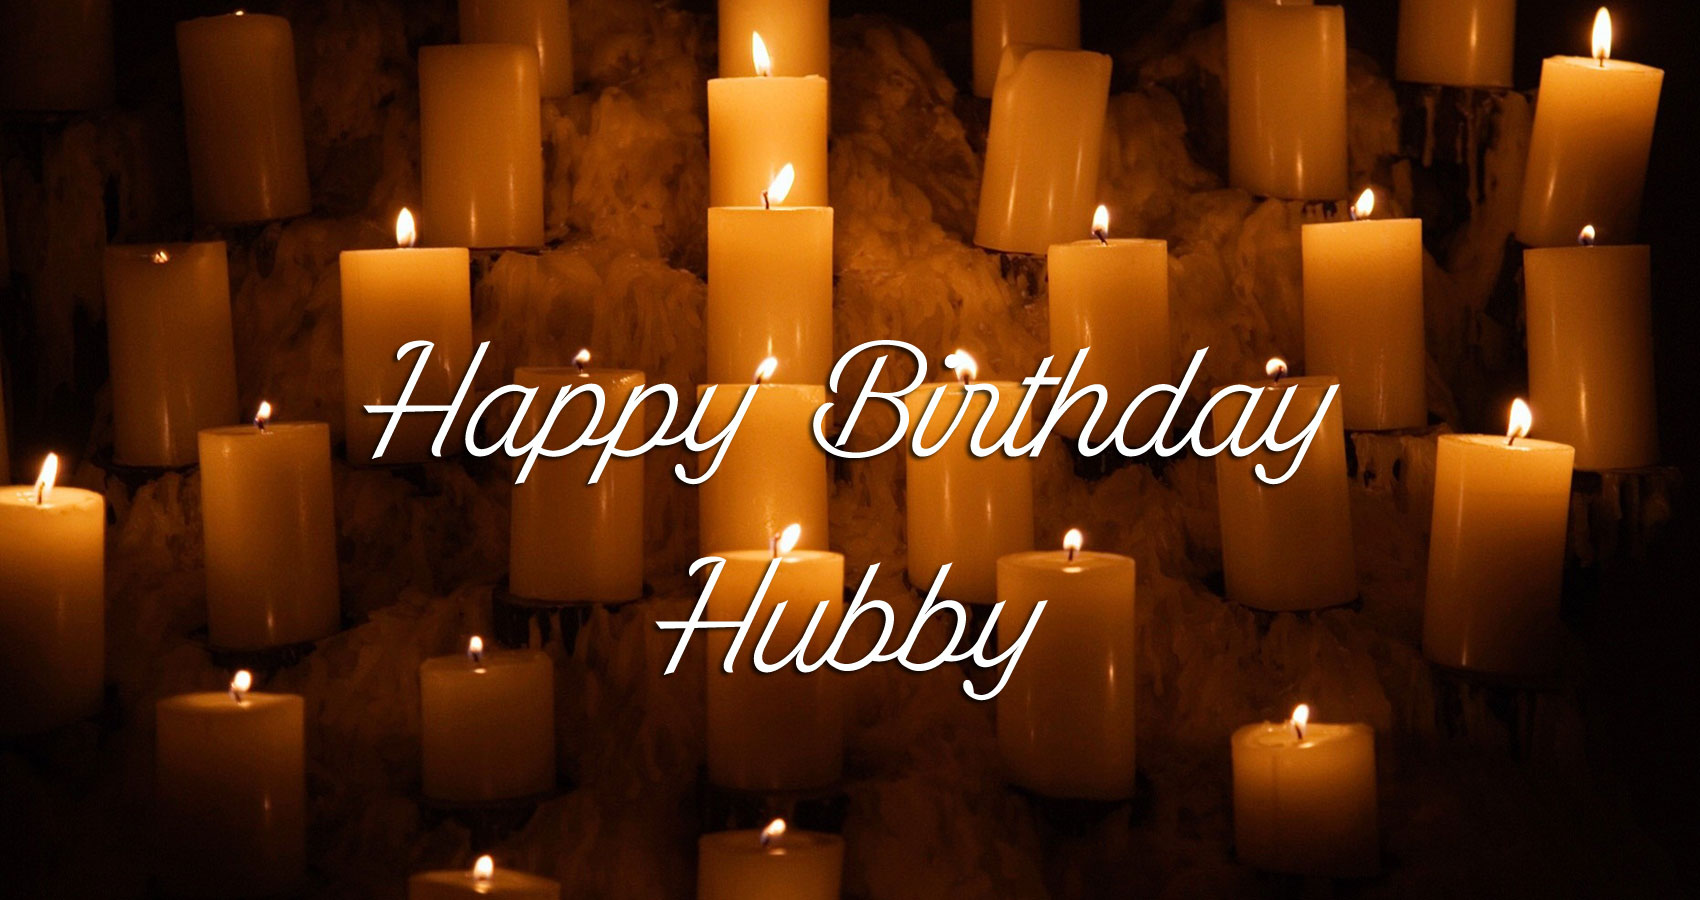 Happy Birthday Hubby by Genie Nakano at Spillwords.com